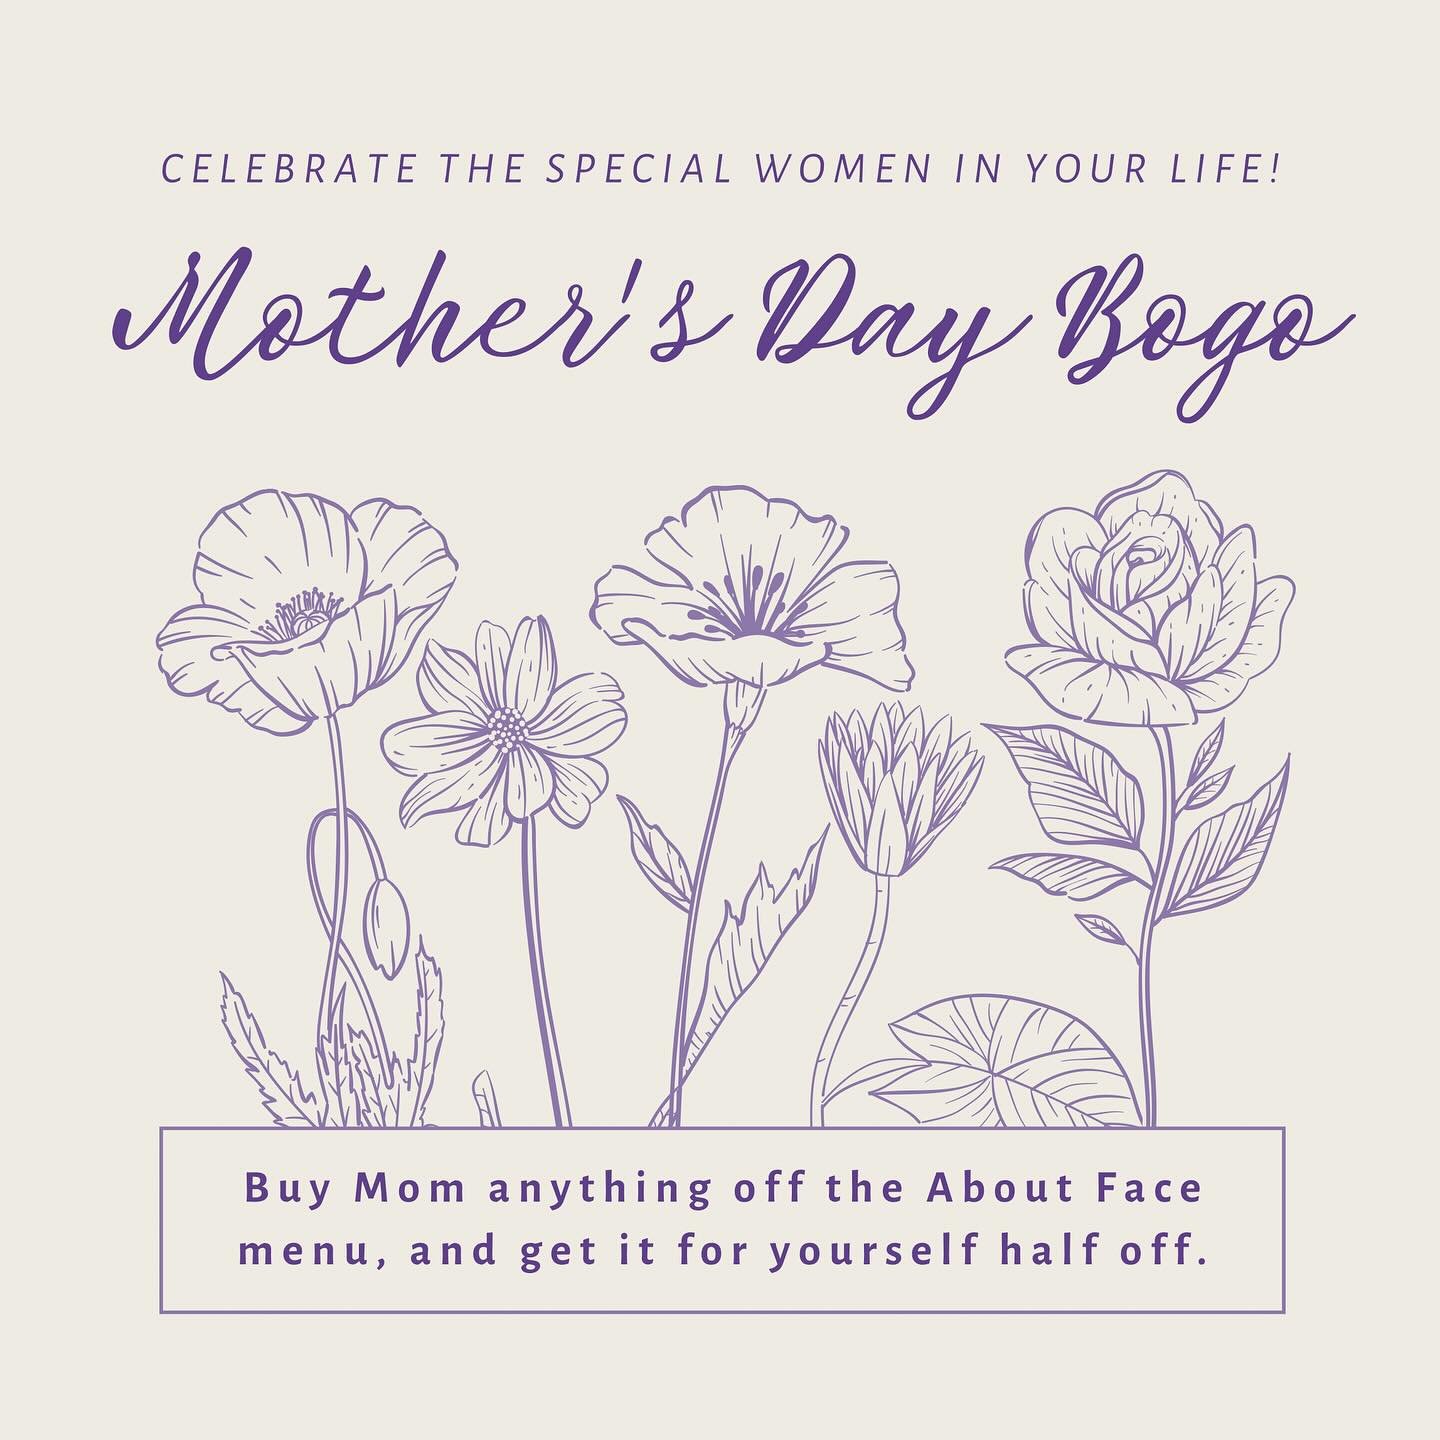 Mother&rsquo;s Day is 2 days away! 🌼 Running out of time to find the ideal Mother&rsquo;s Day gift? About Face has got you covered! Call 248-399-1330 or visit us in Downtown Royal Oak and treat the special women in your life 💛
.
.
.
#mothersdaygift